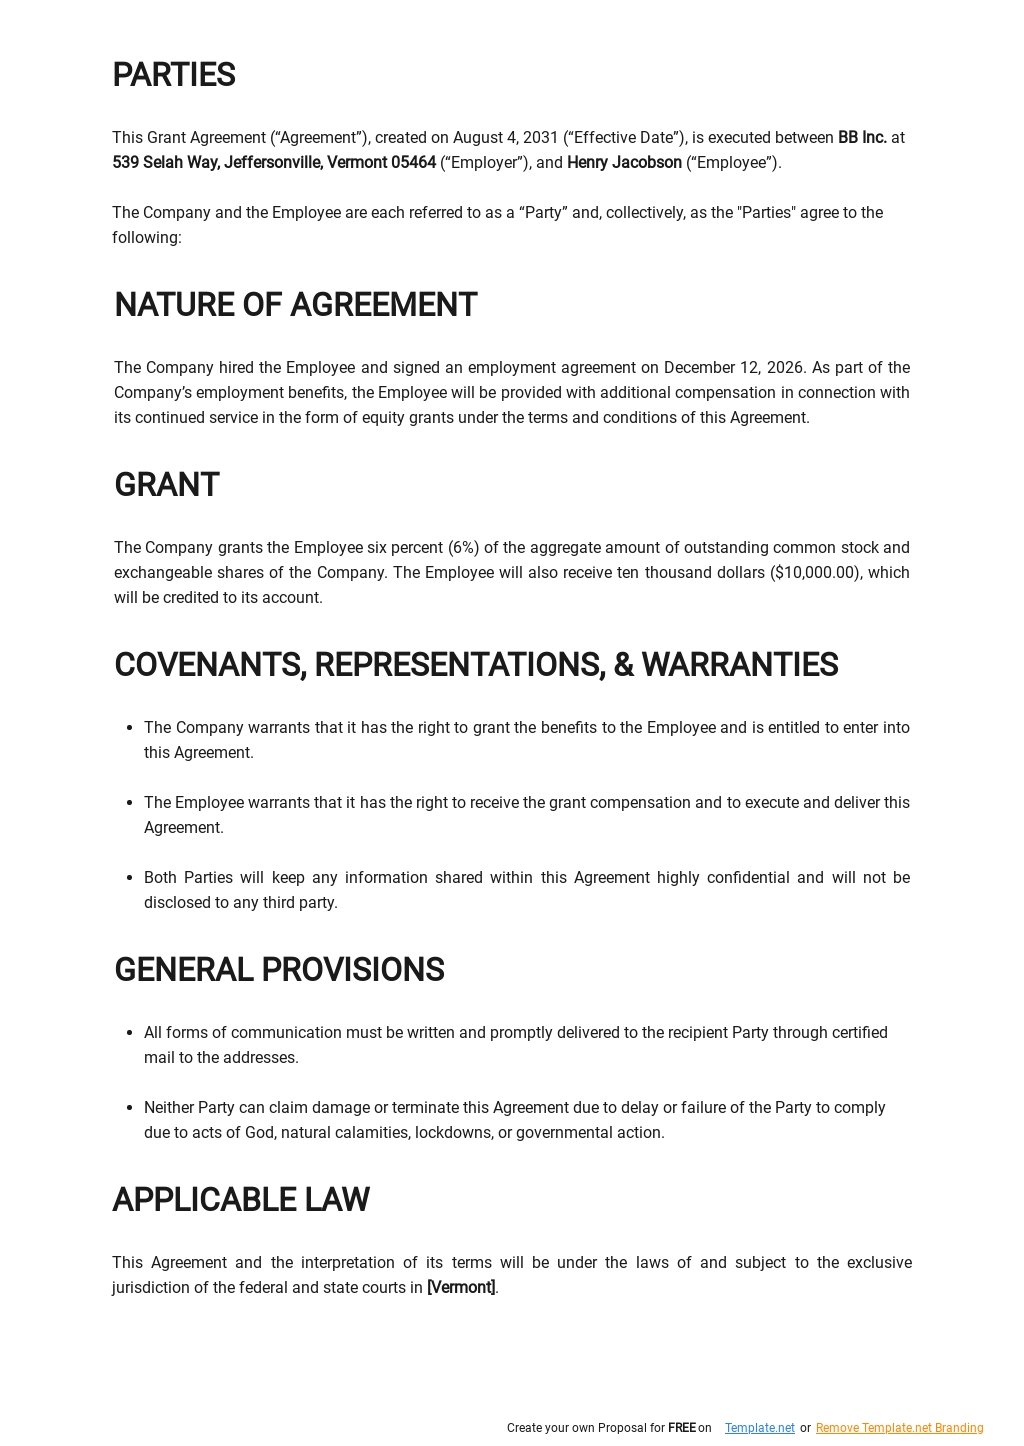 FREE Sample Grant Agreement Template in Google Docs, Word